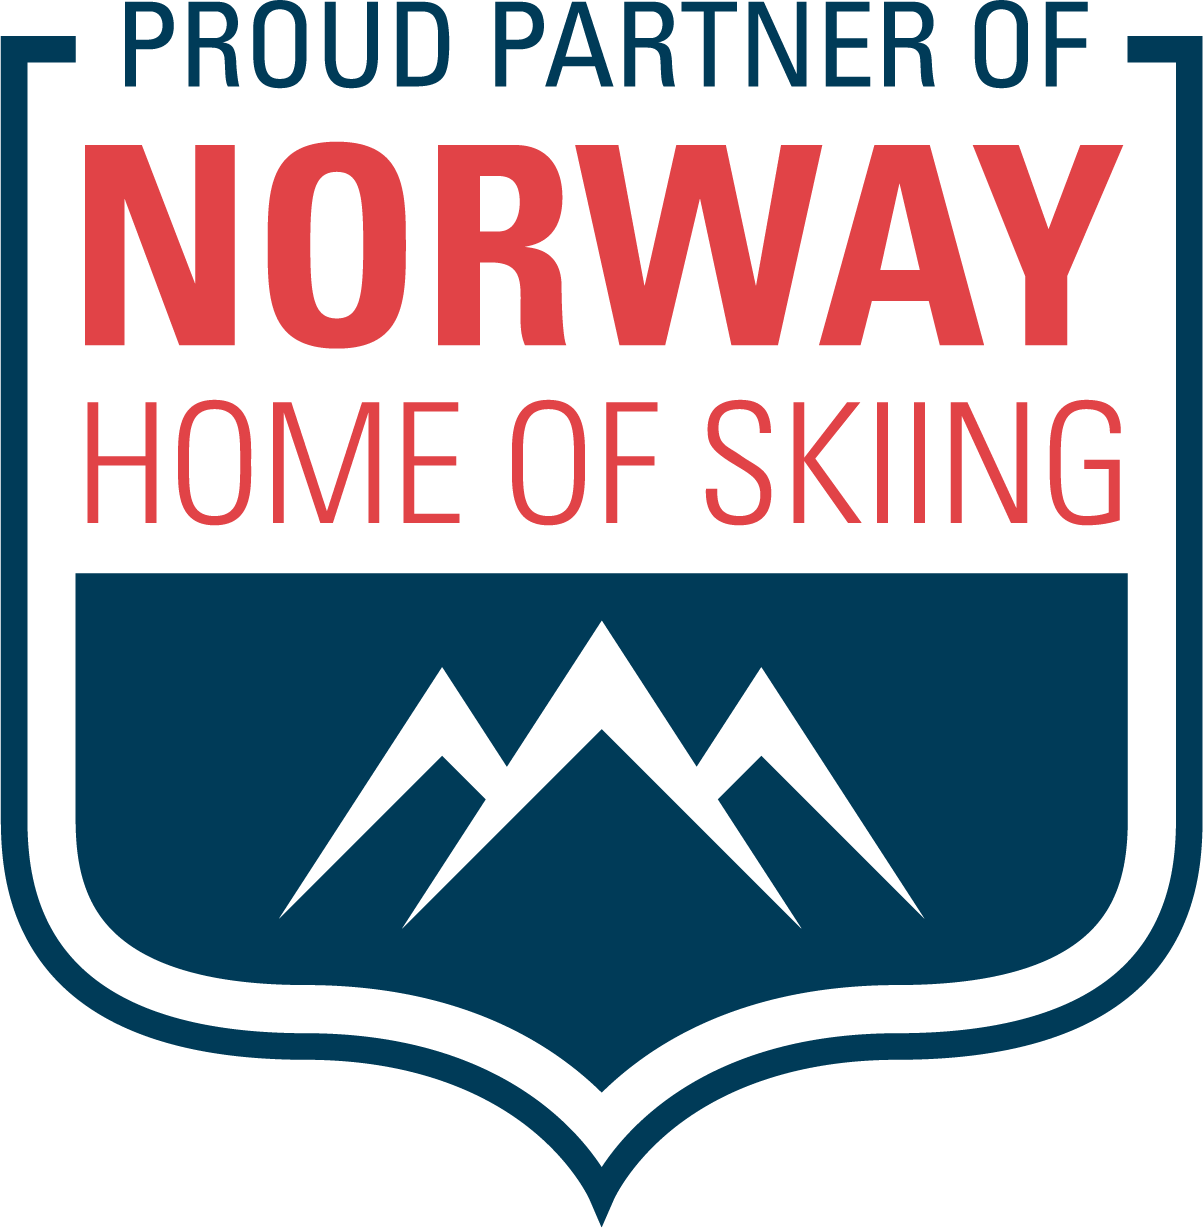 Norway Home of Skiing